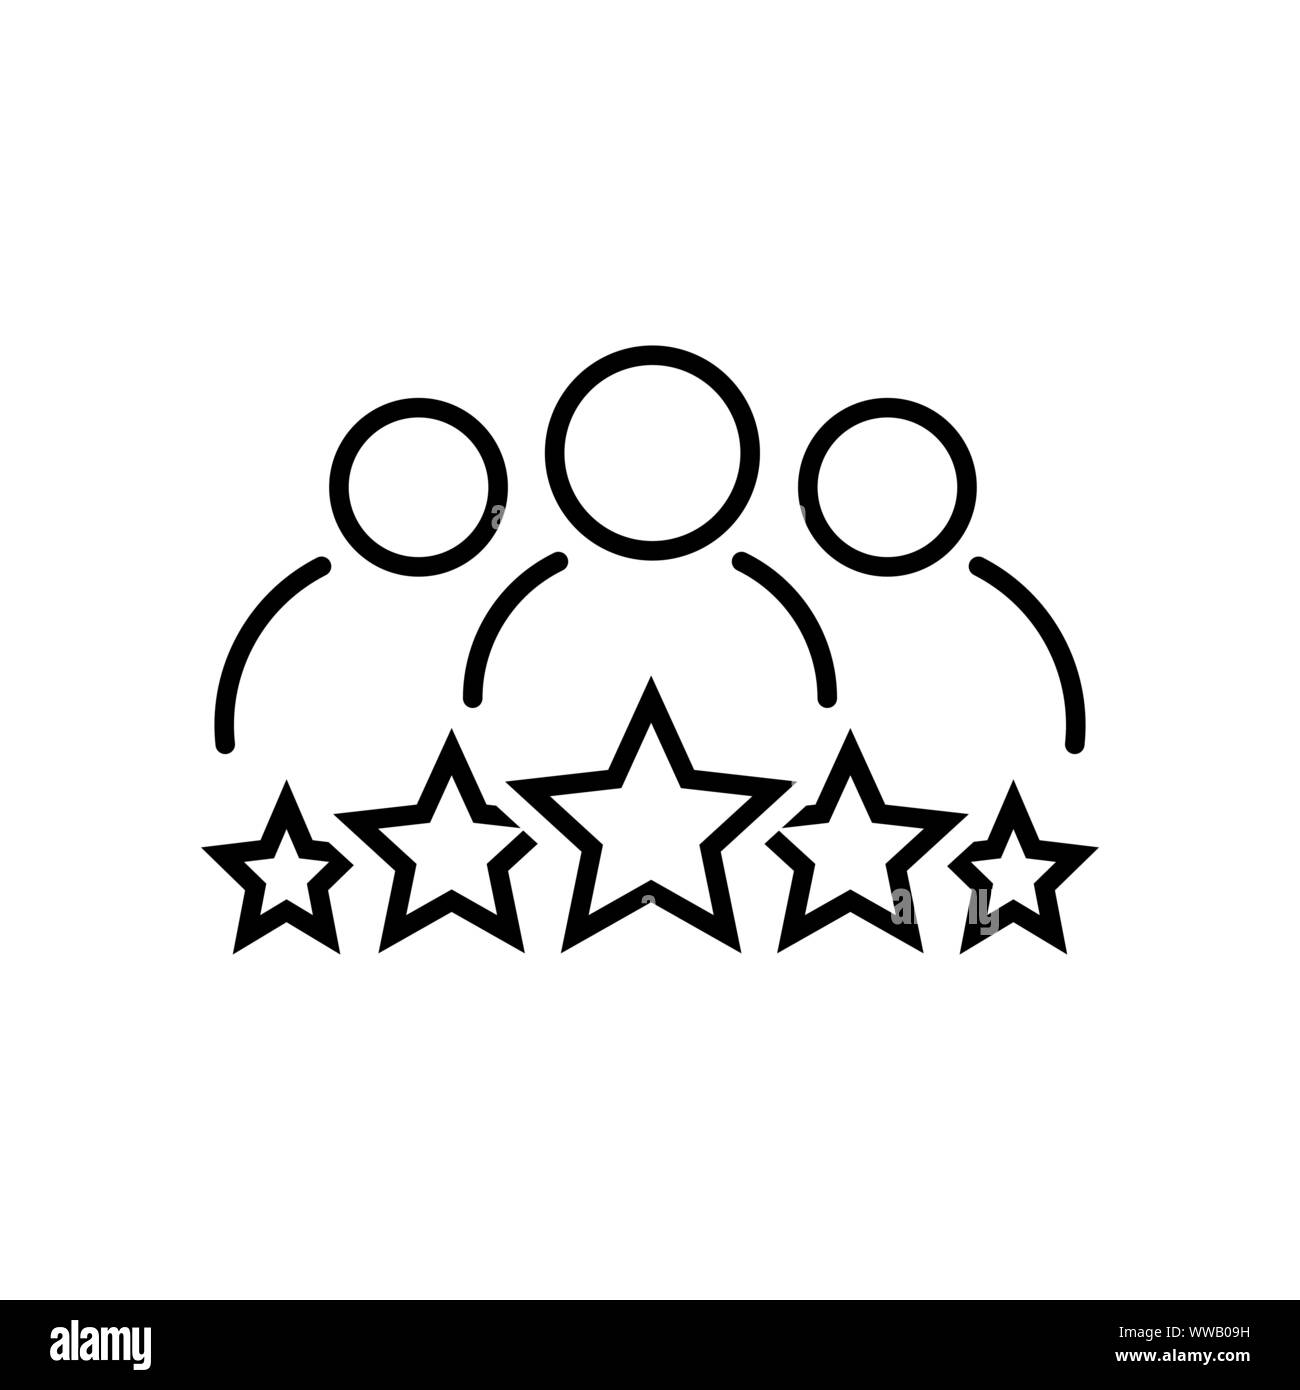 Business client line icon. Team and 5 stars symbol Stock Vector